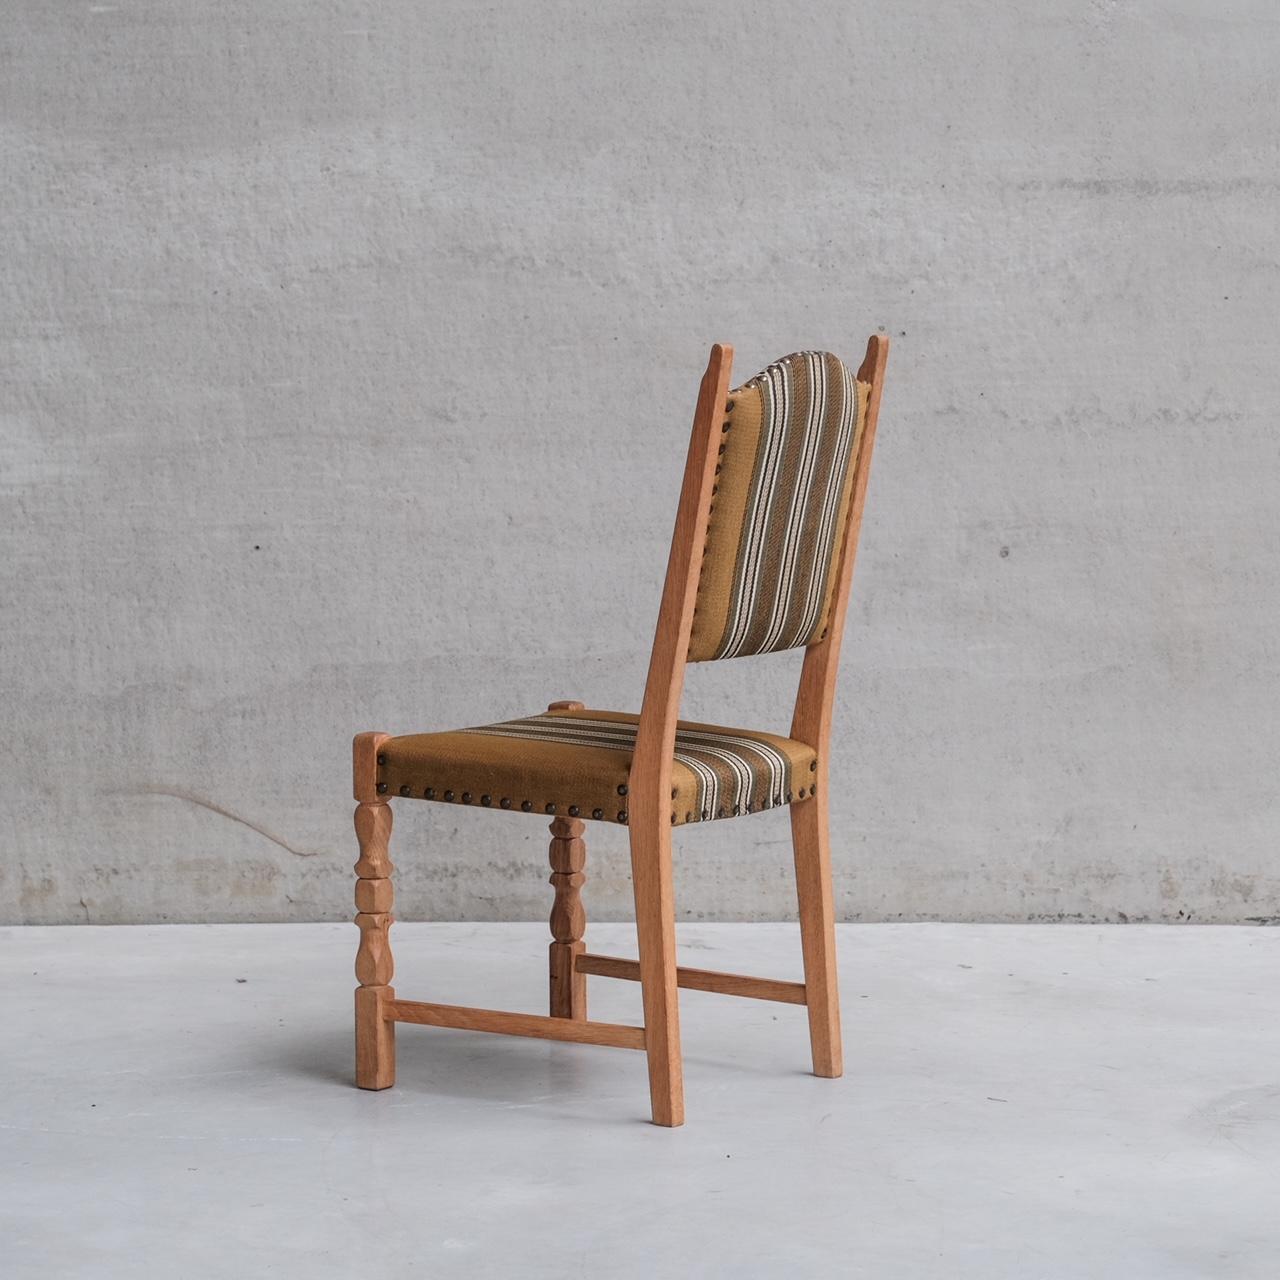 Danish Mid-Century Oak Upholstered Dining Chairs (6) In Good Condition For Sale In London, GB